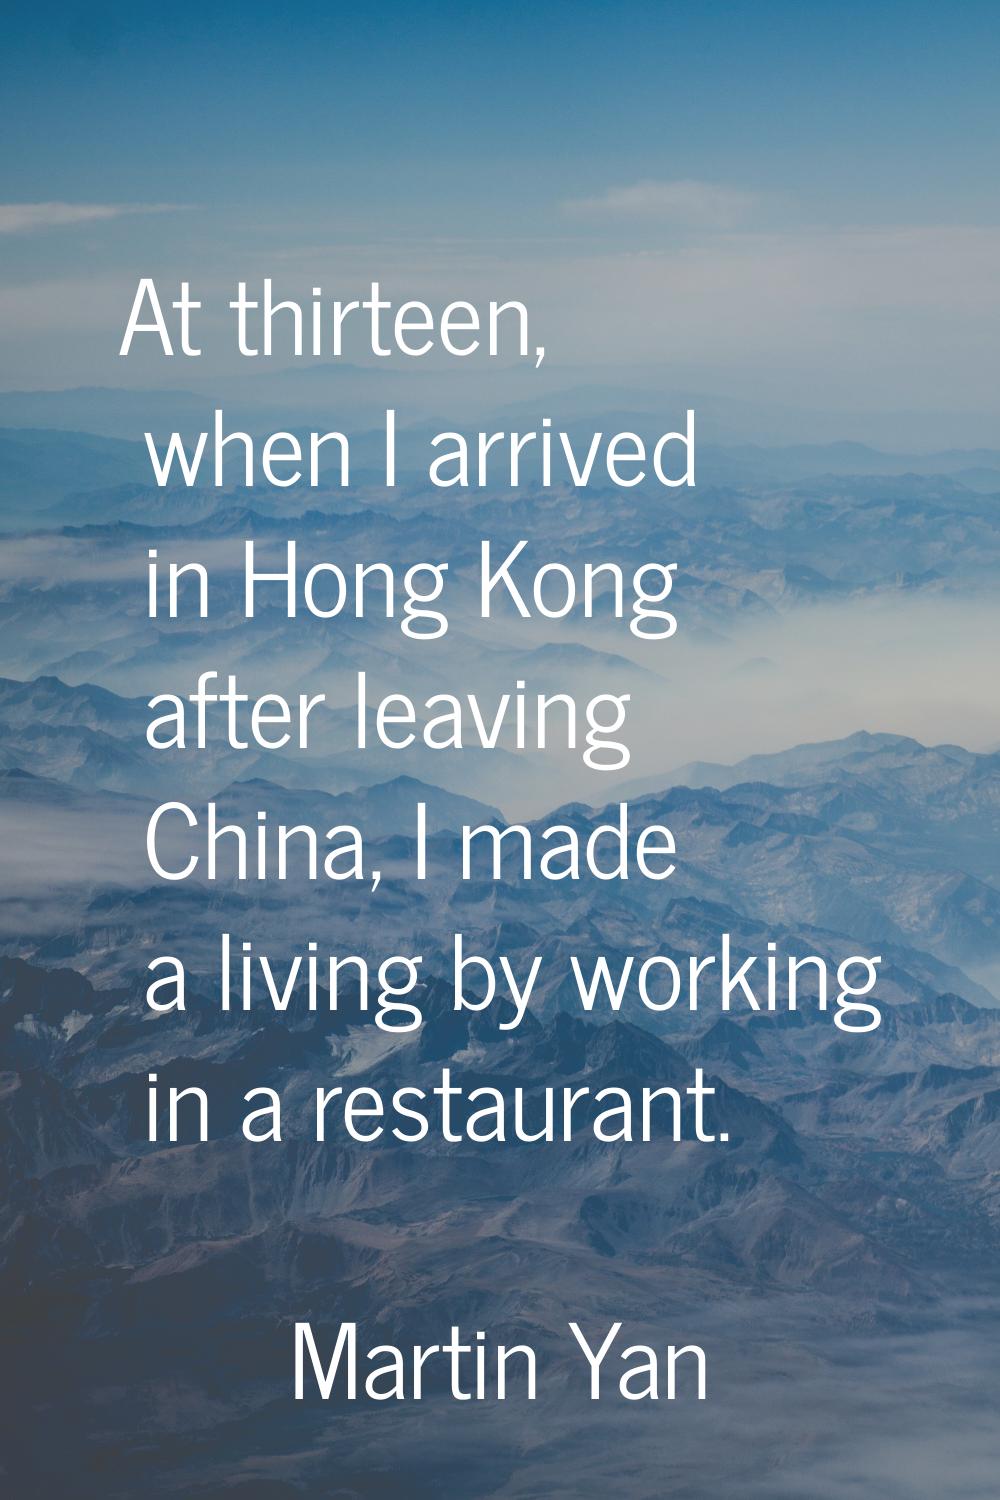 At thirteen, when I arrived in Hong Kong after leaving China, I made a living by working in a resta